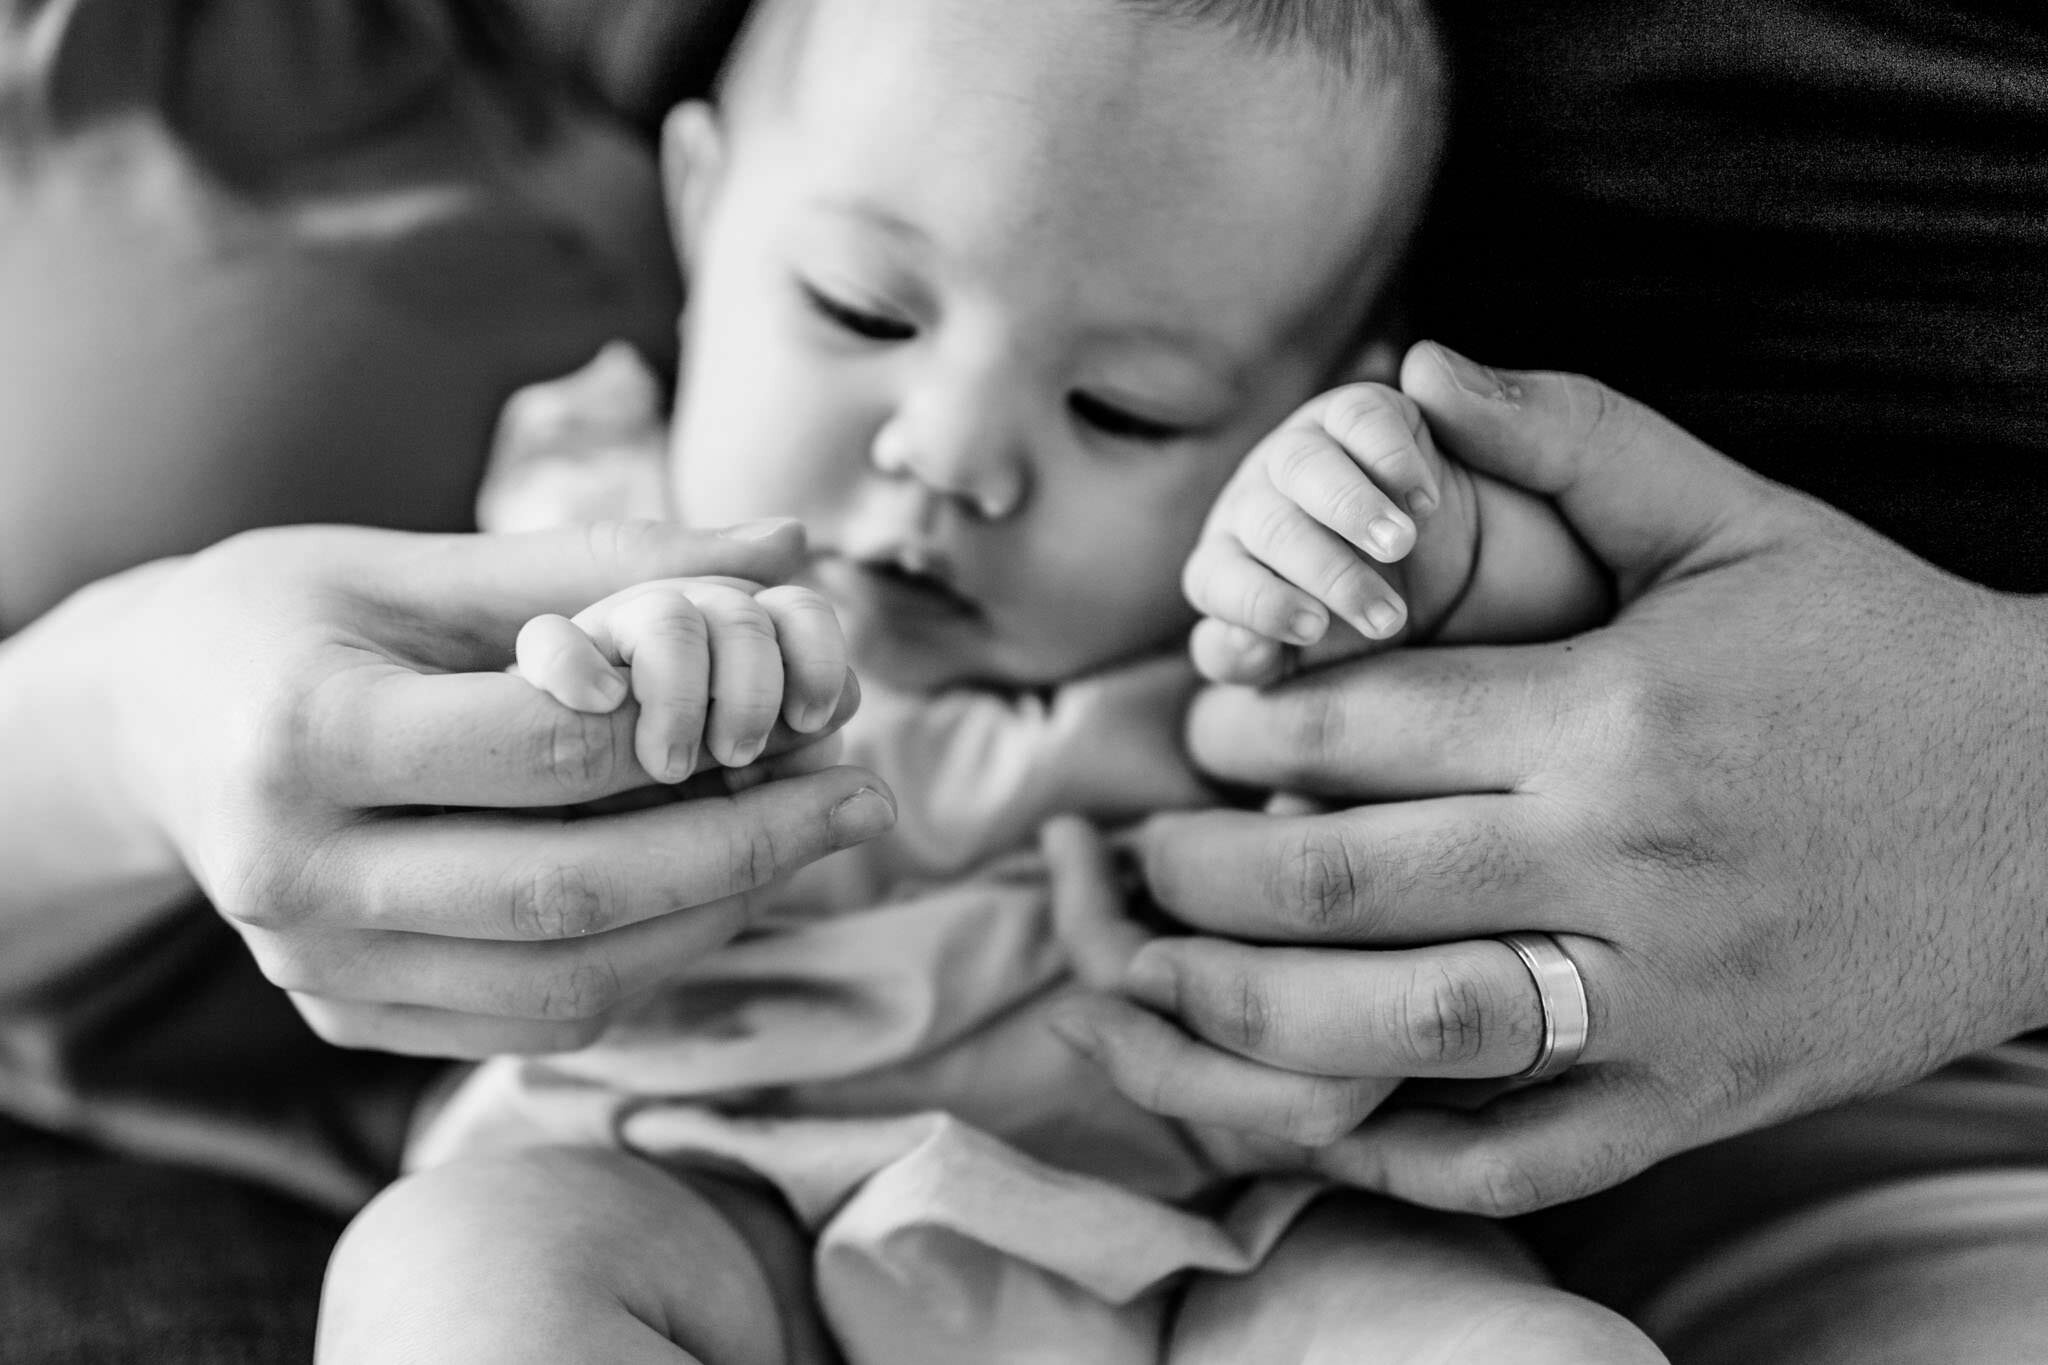 Raleigh Family Photographer | By G. Lin Photography | Black and white photo of baby's hands